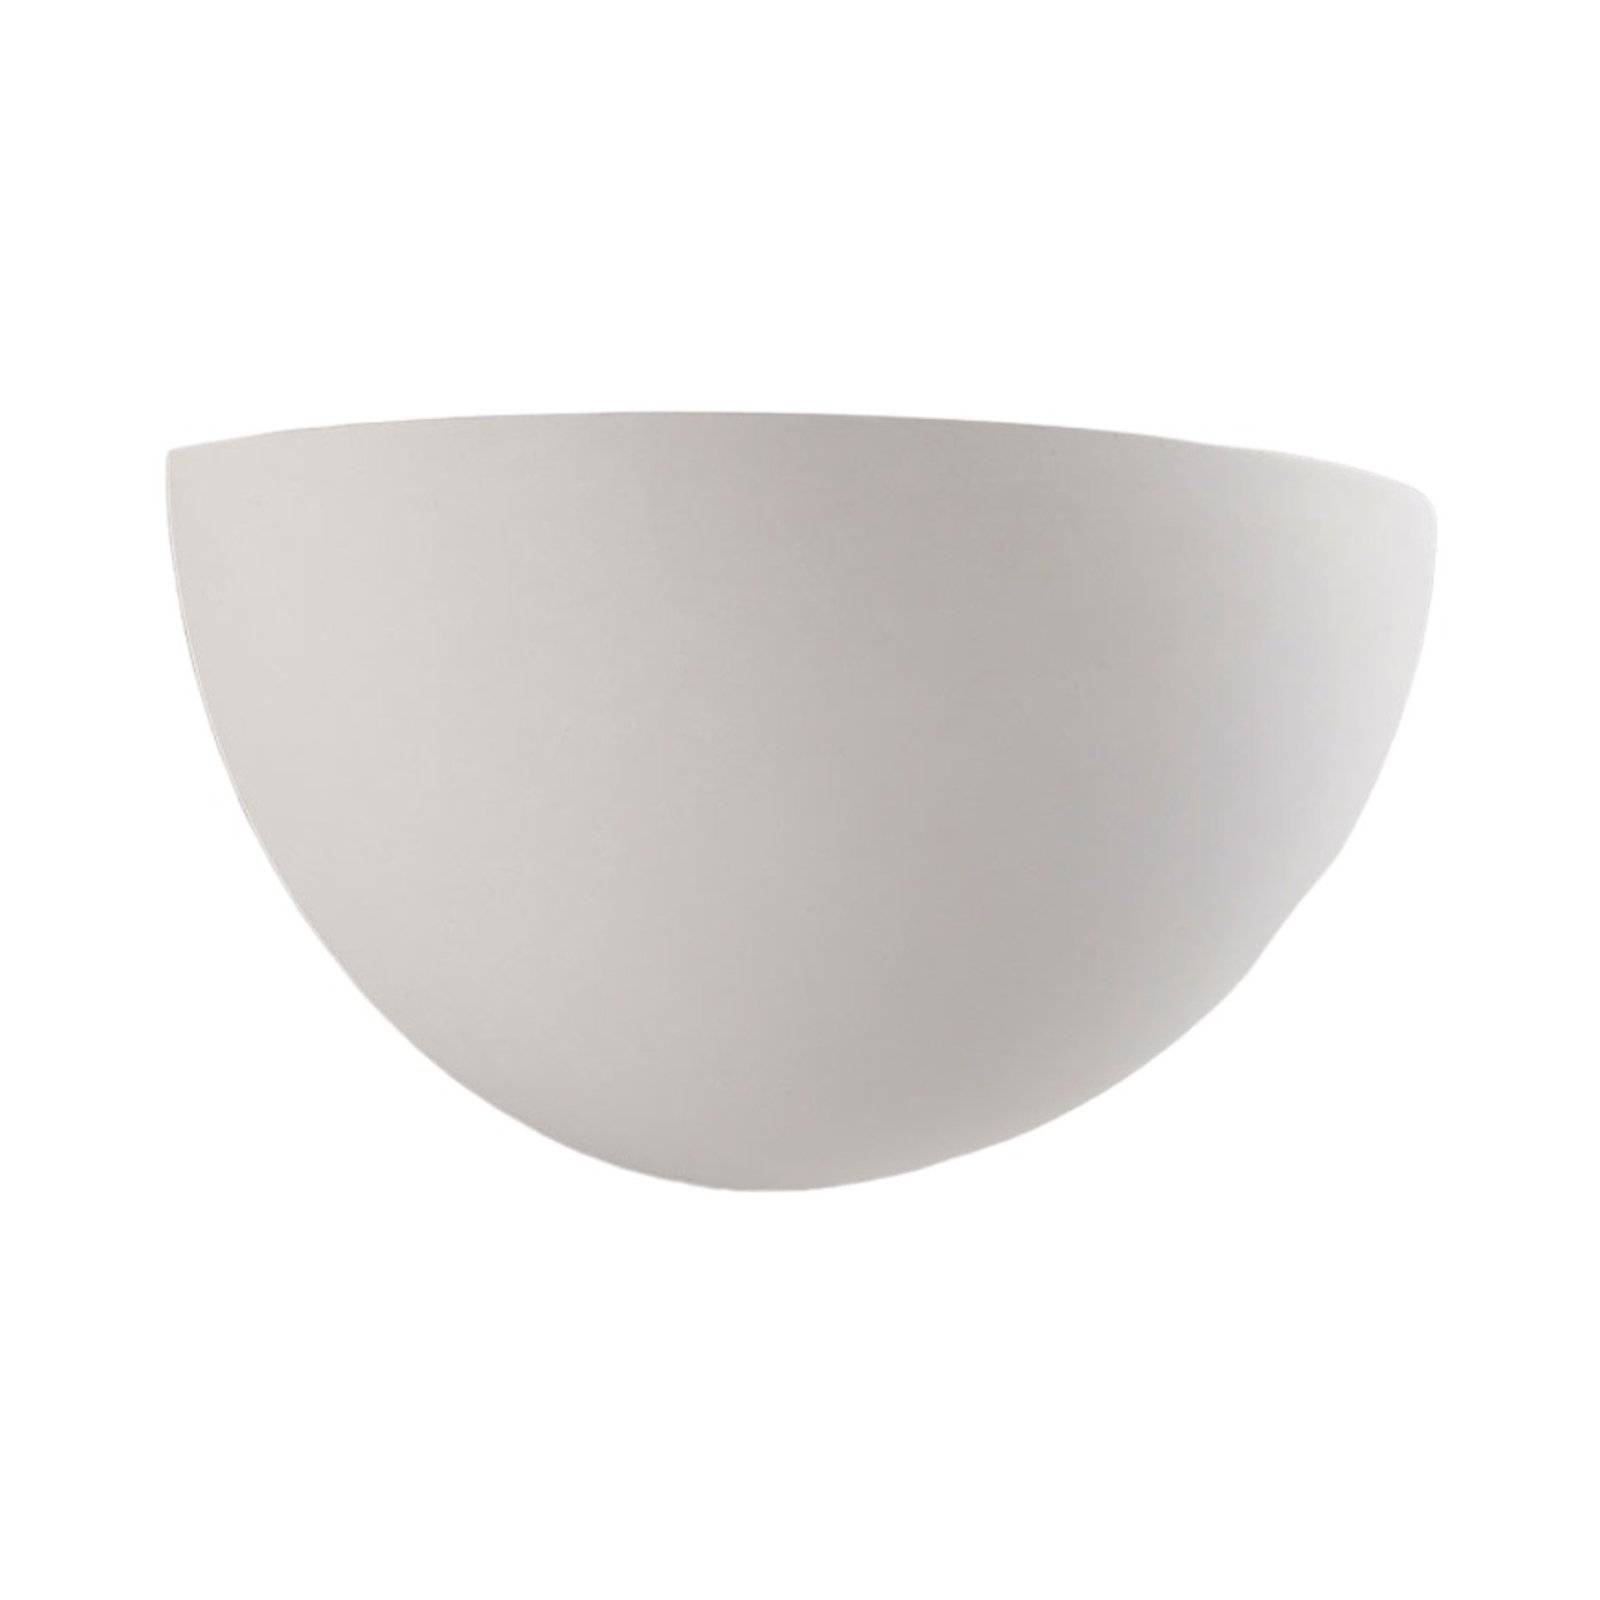 Lindby Narin wall uplighter, plaster, white